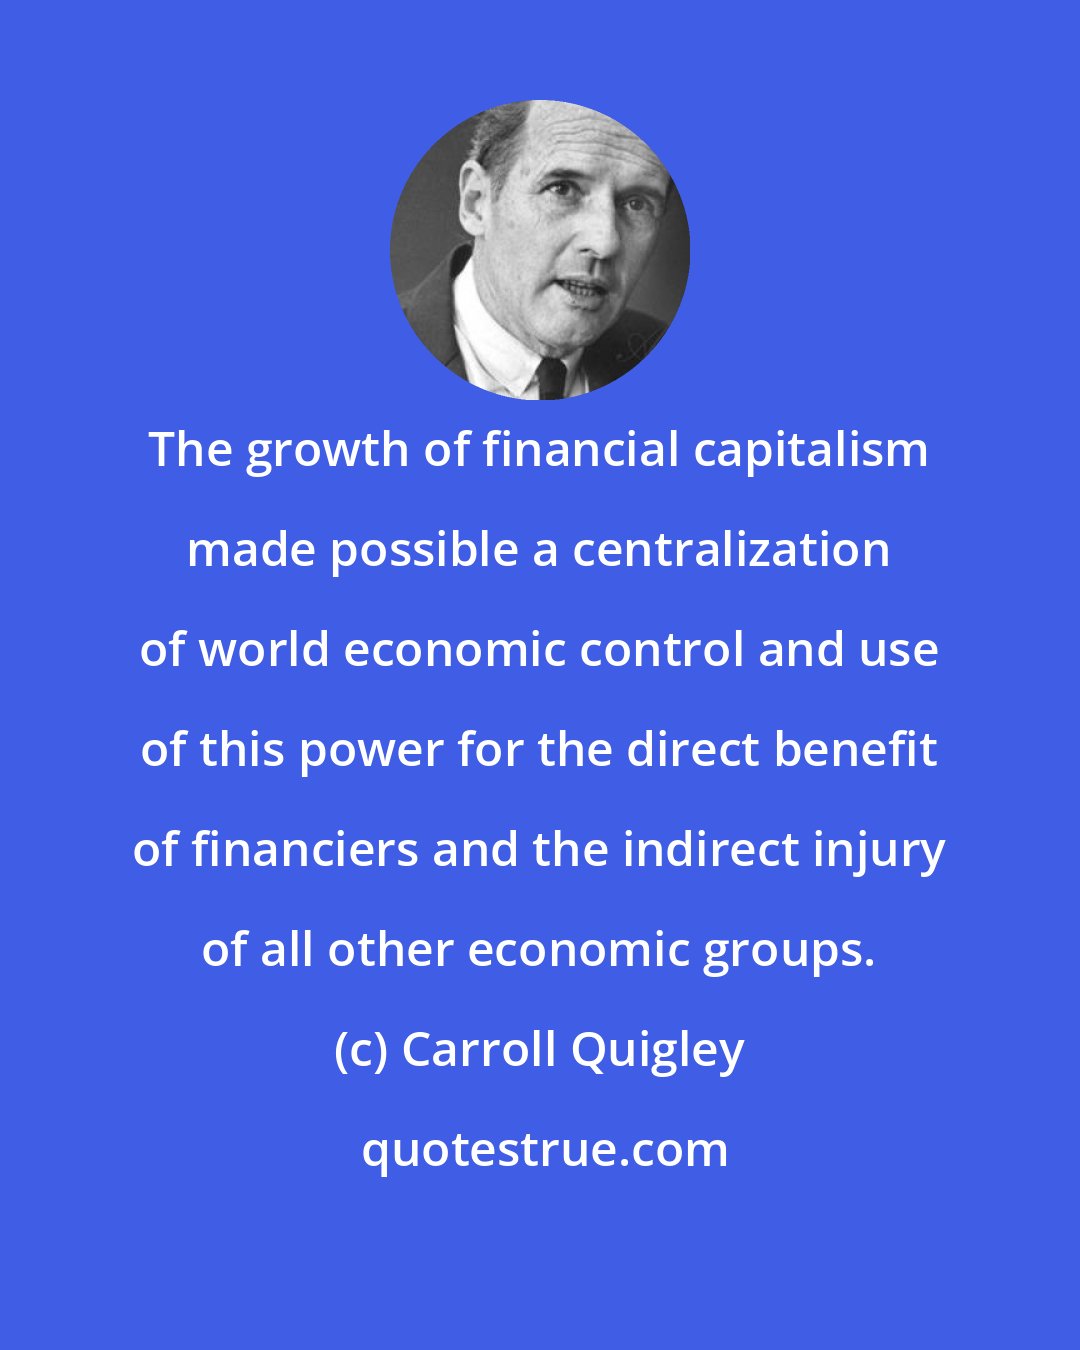 Carroll Quigley: The growth of financial capitalism made possible a centralization of world economic control and use of this power for the direct benefit of financiers and the indirect injury of all other economic groups.